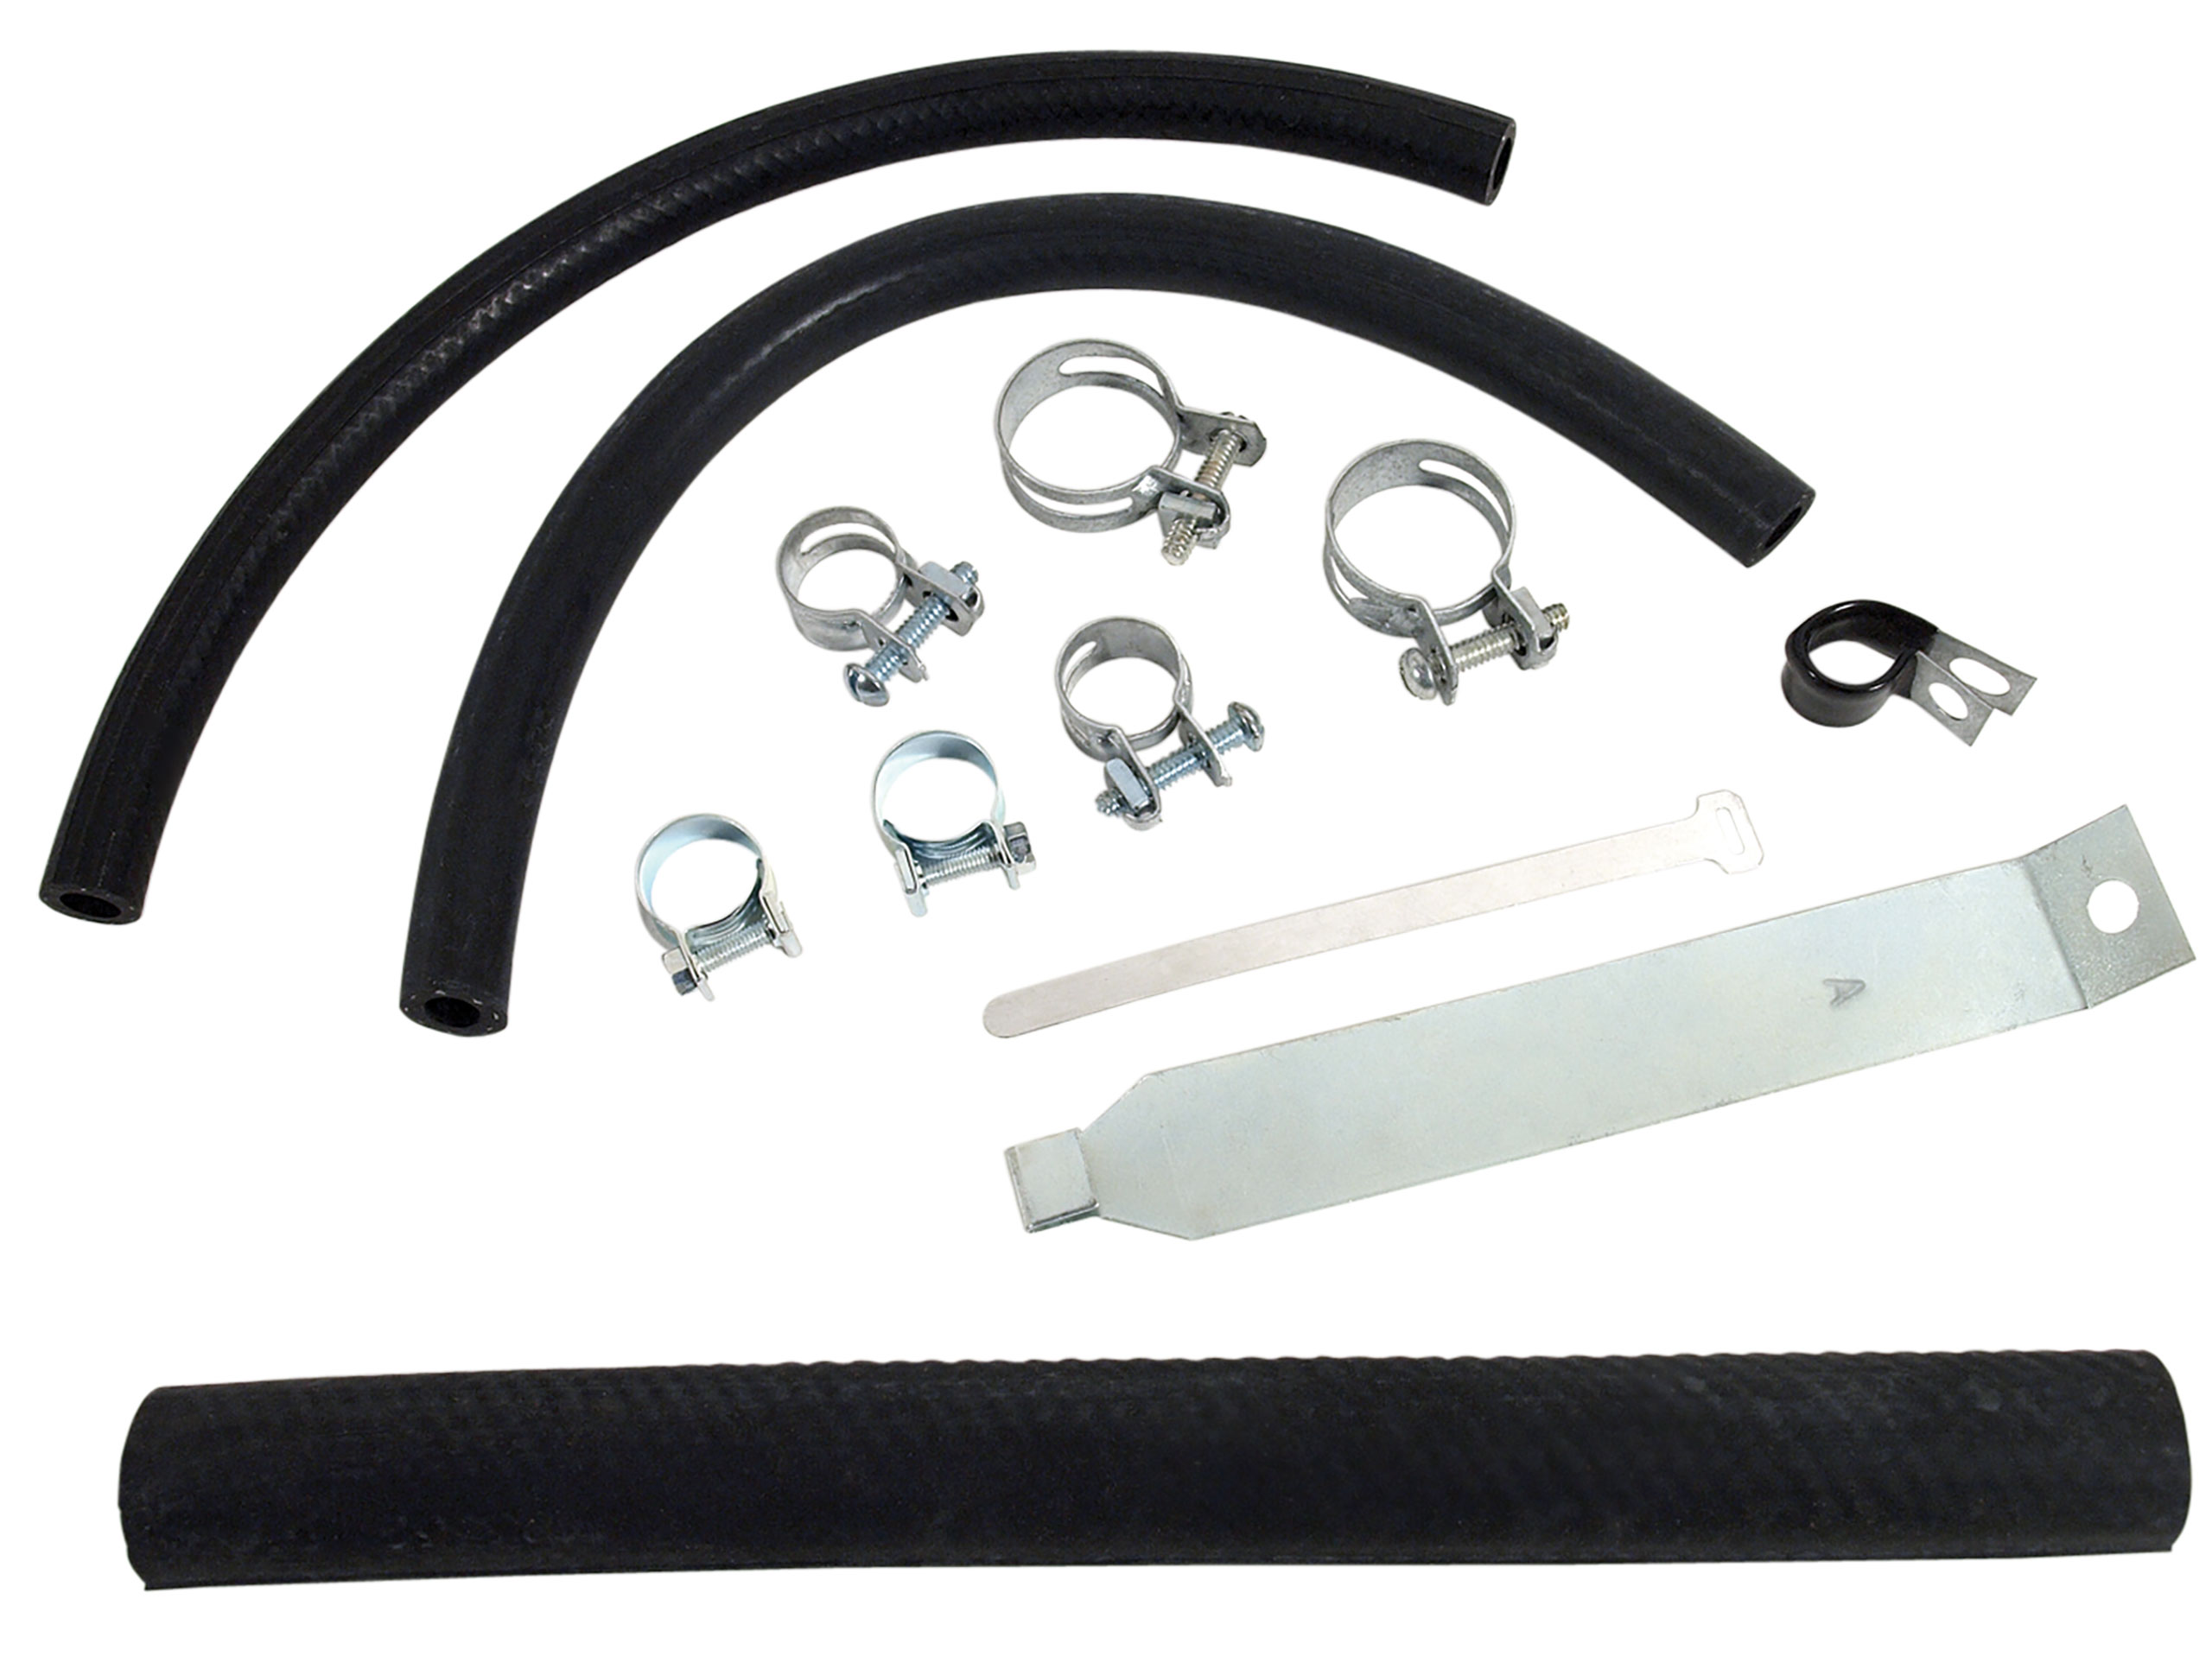 1961-1962 C1 Corvette Expansion Tank Installation Kit - Hoses, Clamps, Mounting Strap